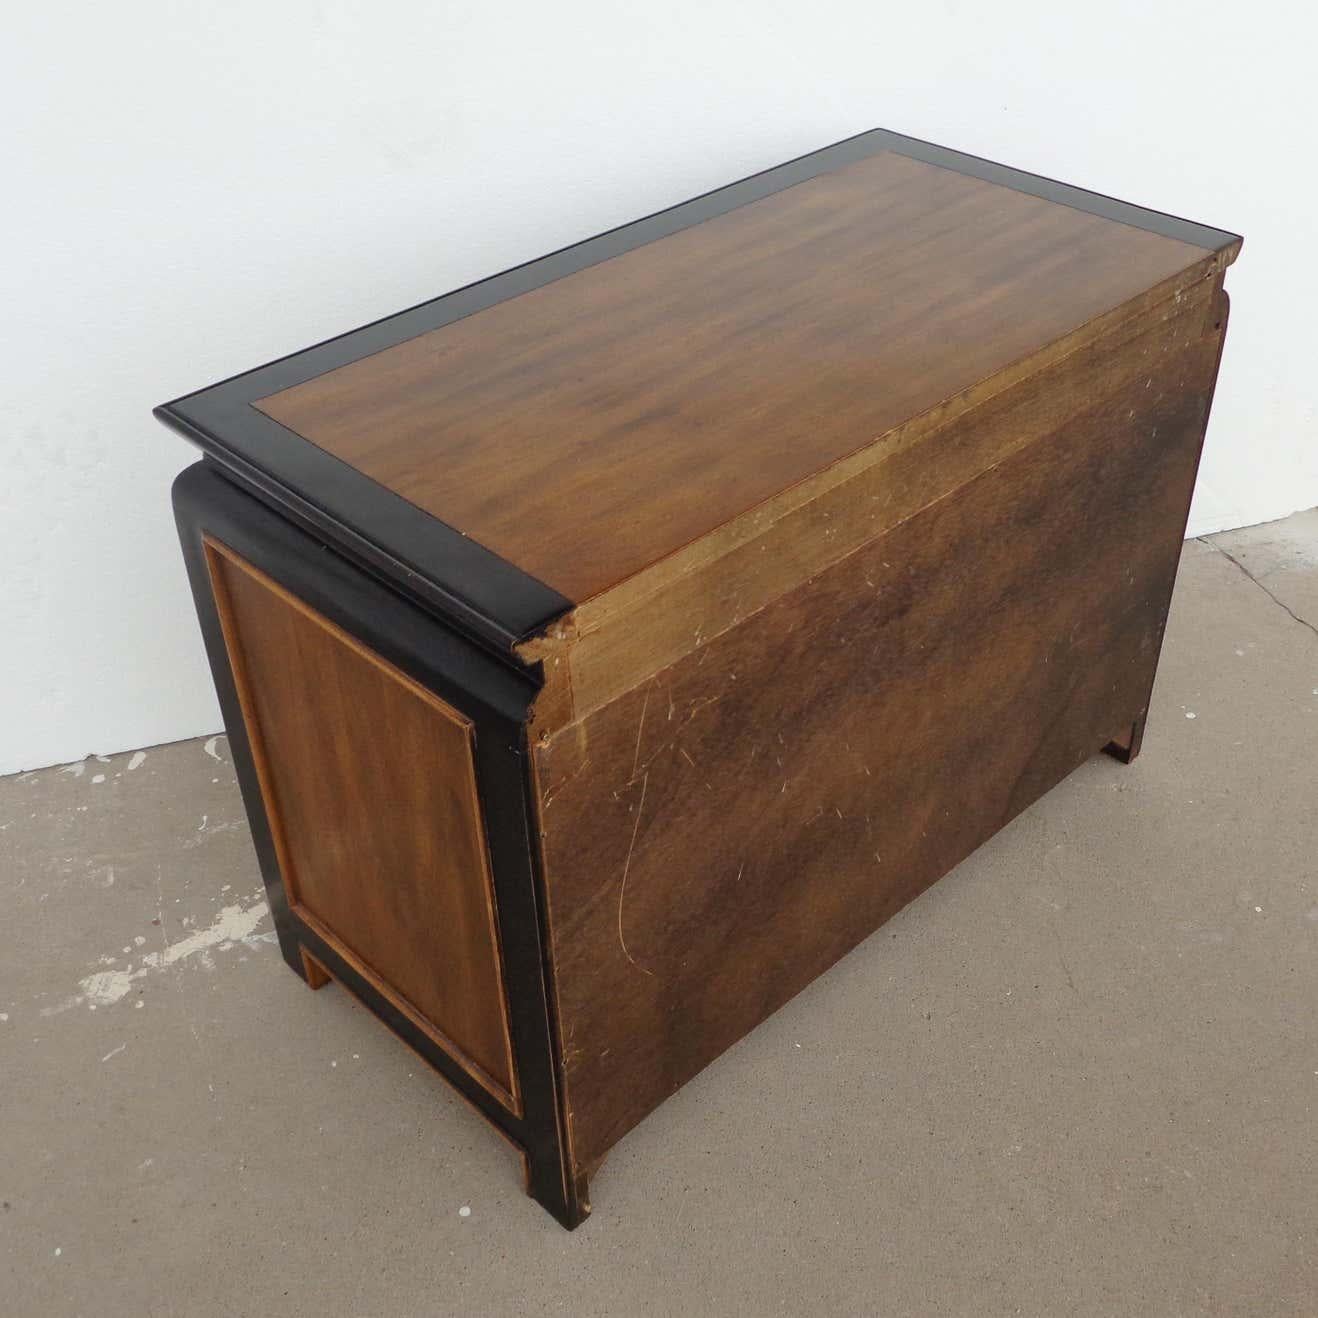 Raymond Karl Sobota Chin Hua nightstands for Century Furniture 

Raymond Karl Sobota (1914-2010) is an award-winning American furniture designer. He attended and obtained his degree in design from Kendall College of Art and Design in his native